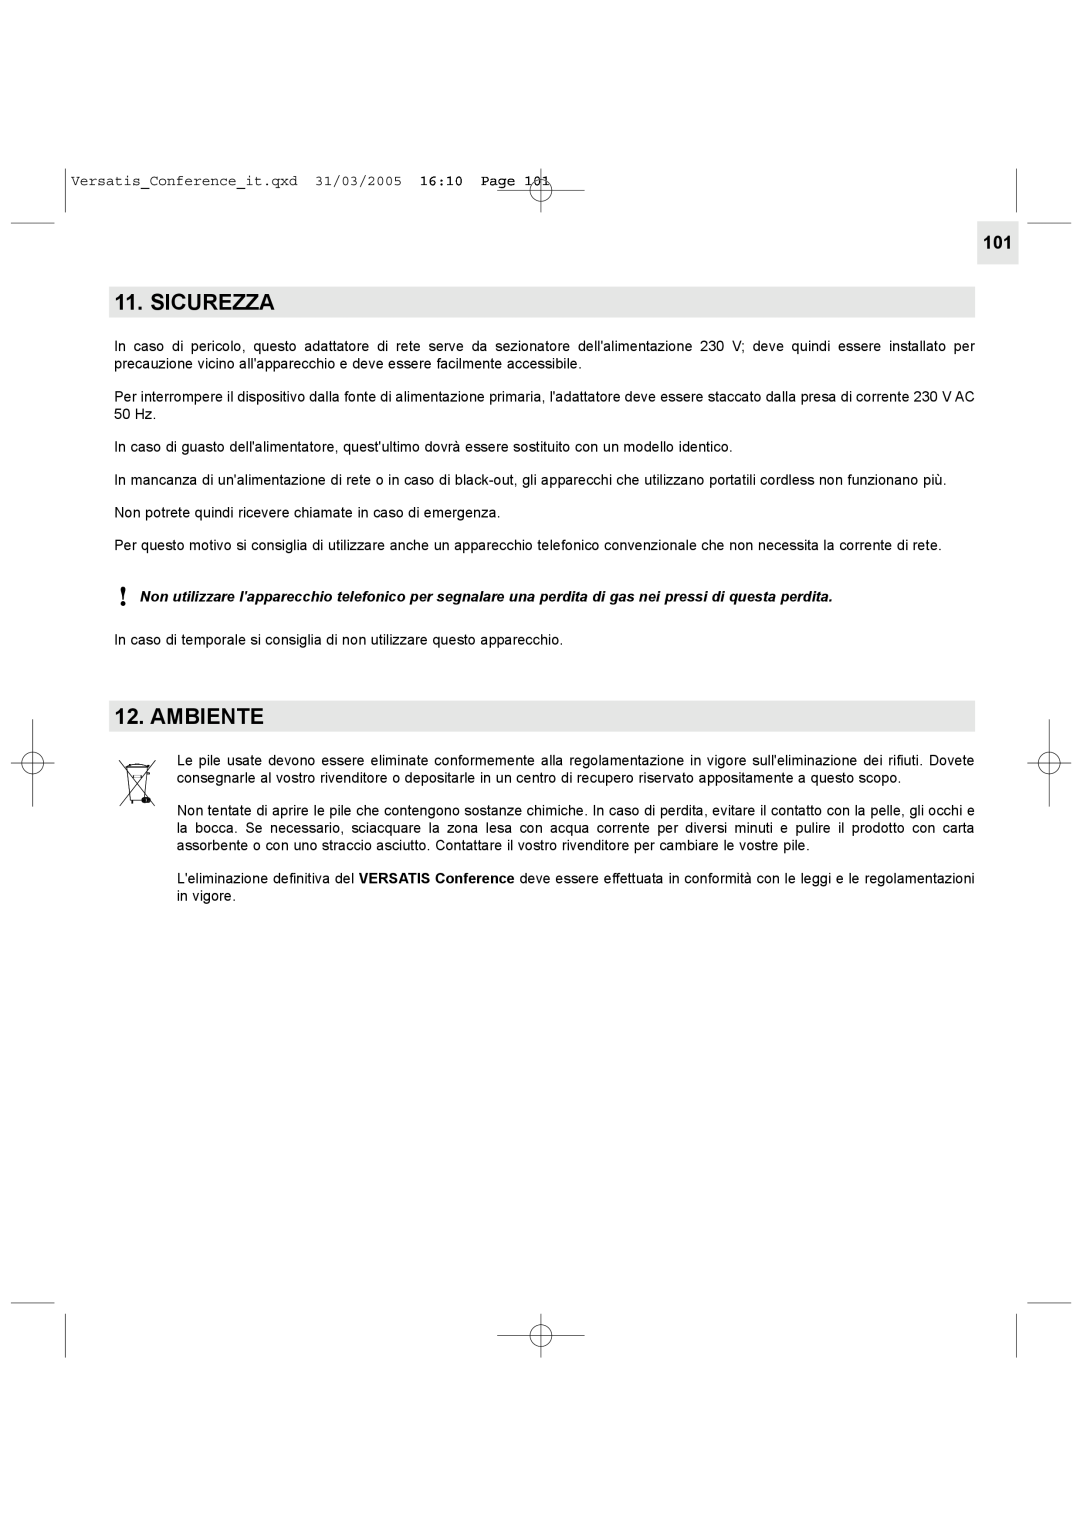 Alcatel Carrier Internetworking Solutions Conference Phone manual Sicurezza, Ambiente 